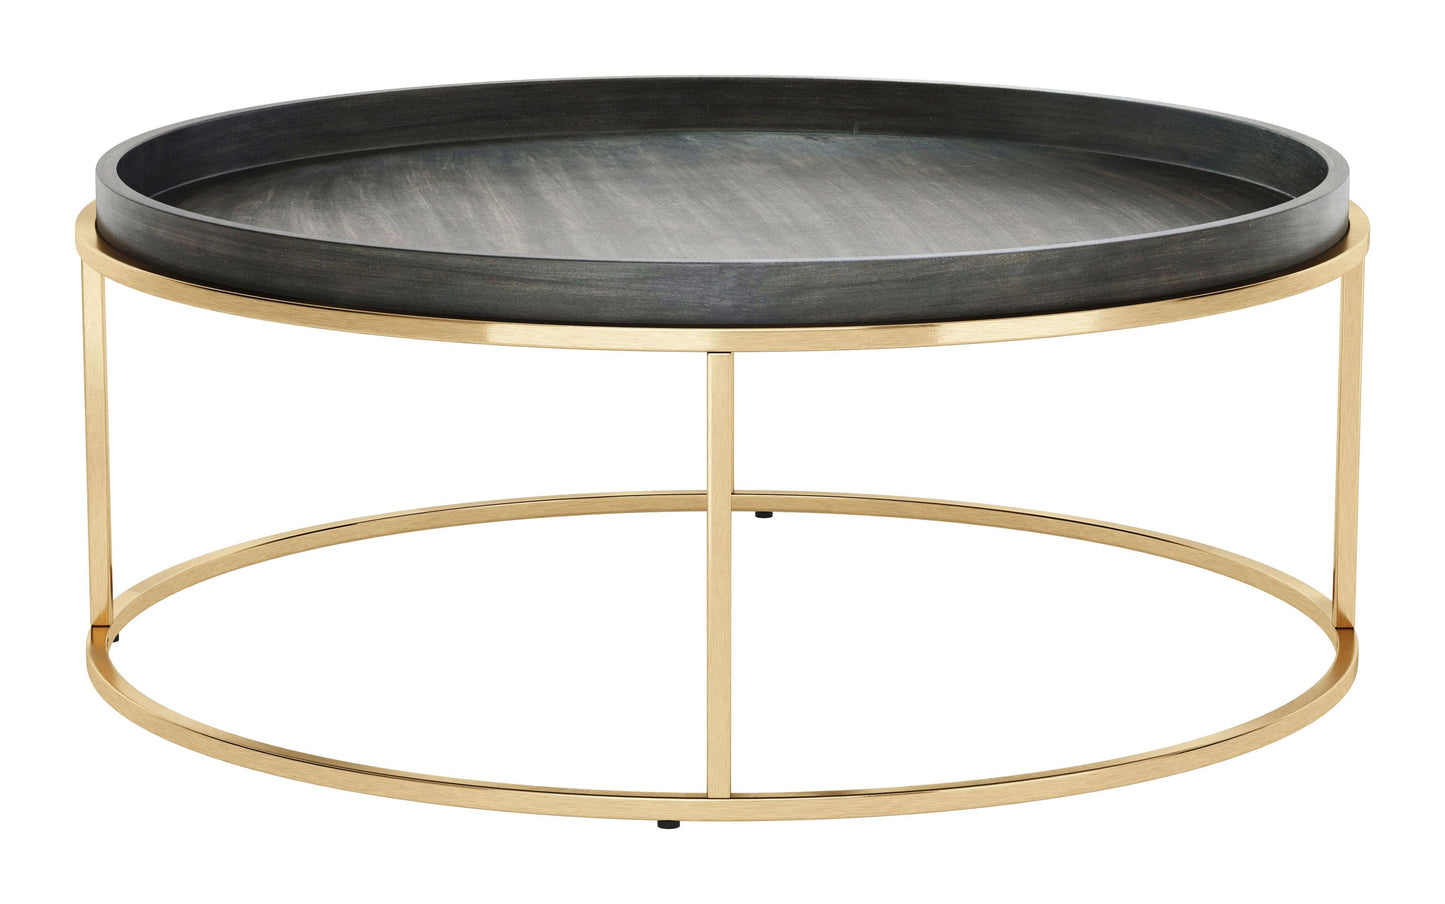 Oval base of Jahre coffee table